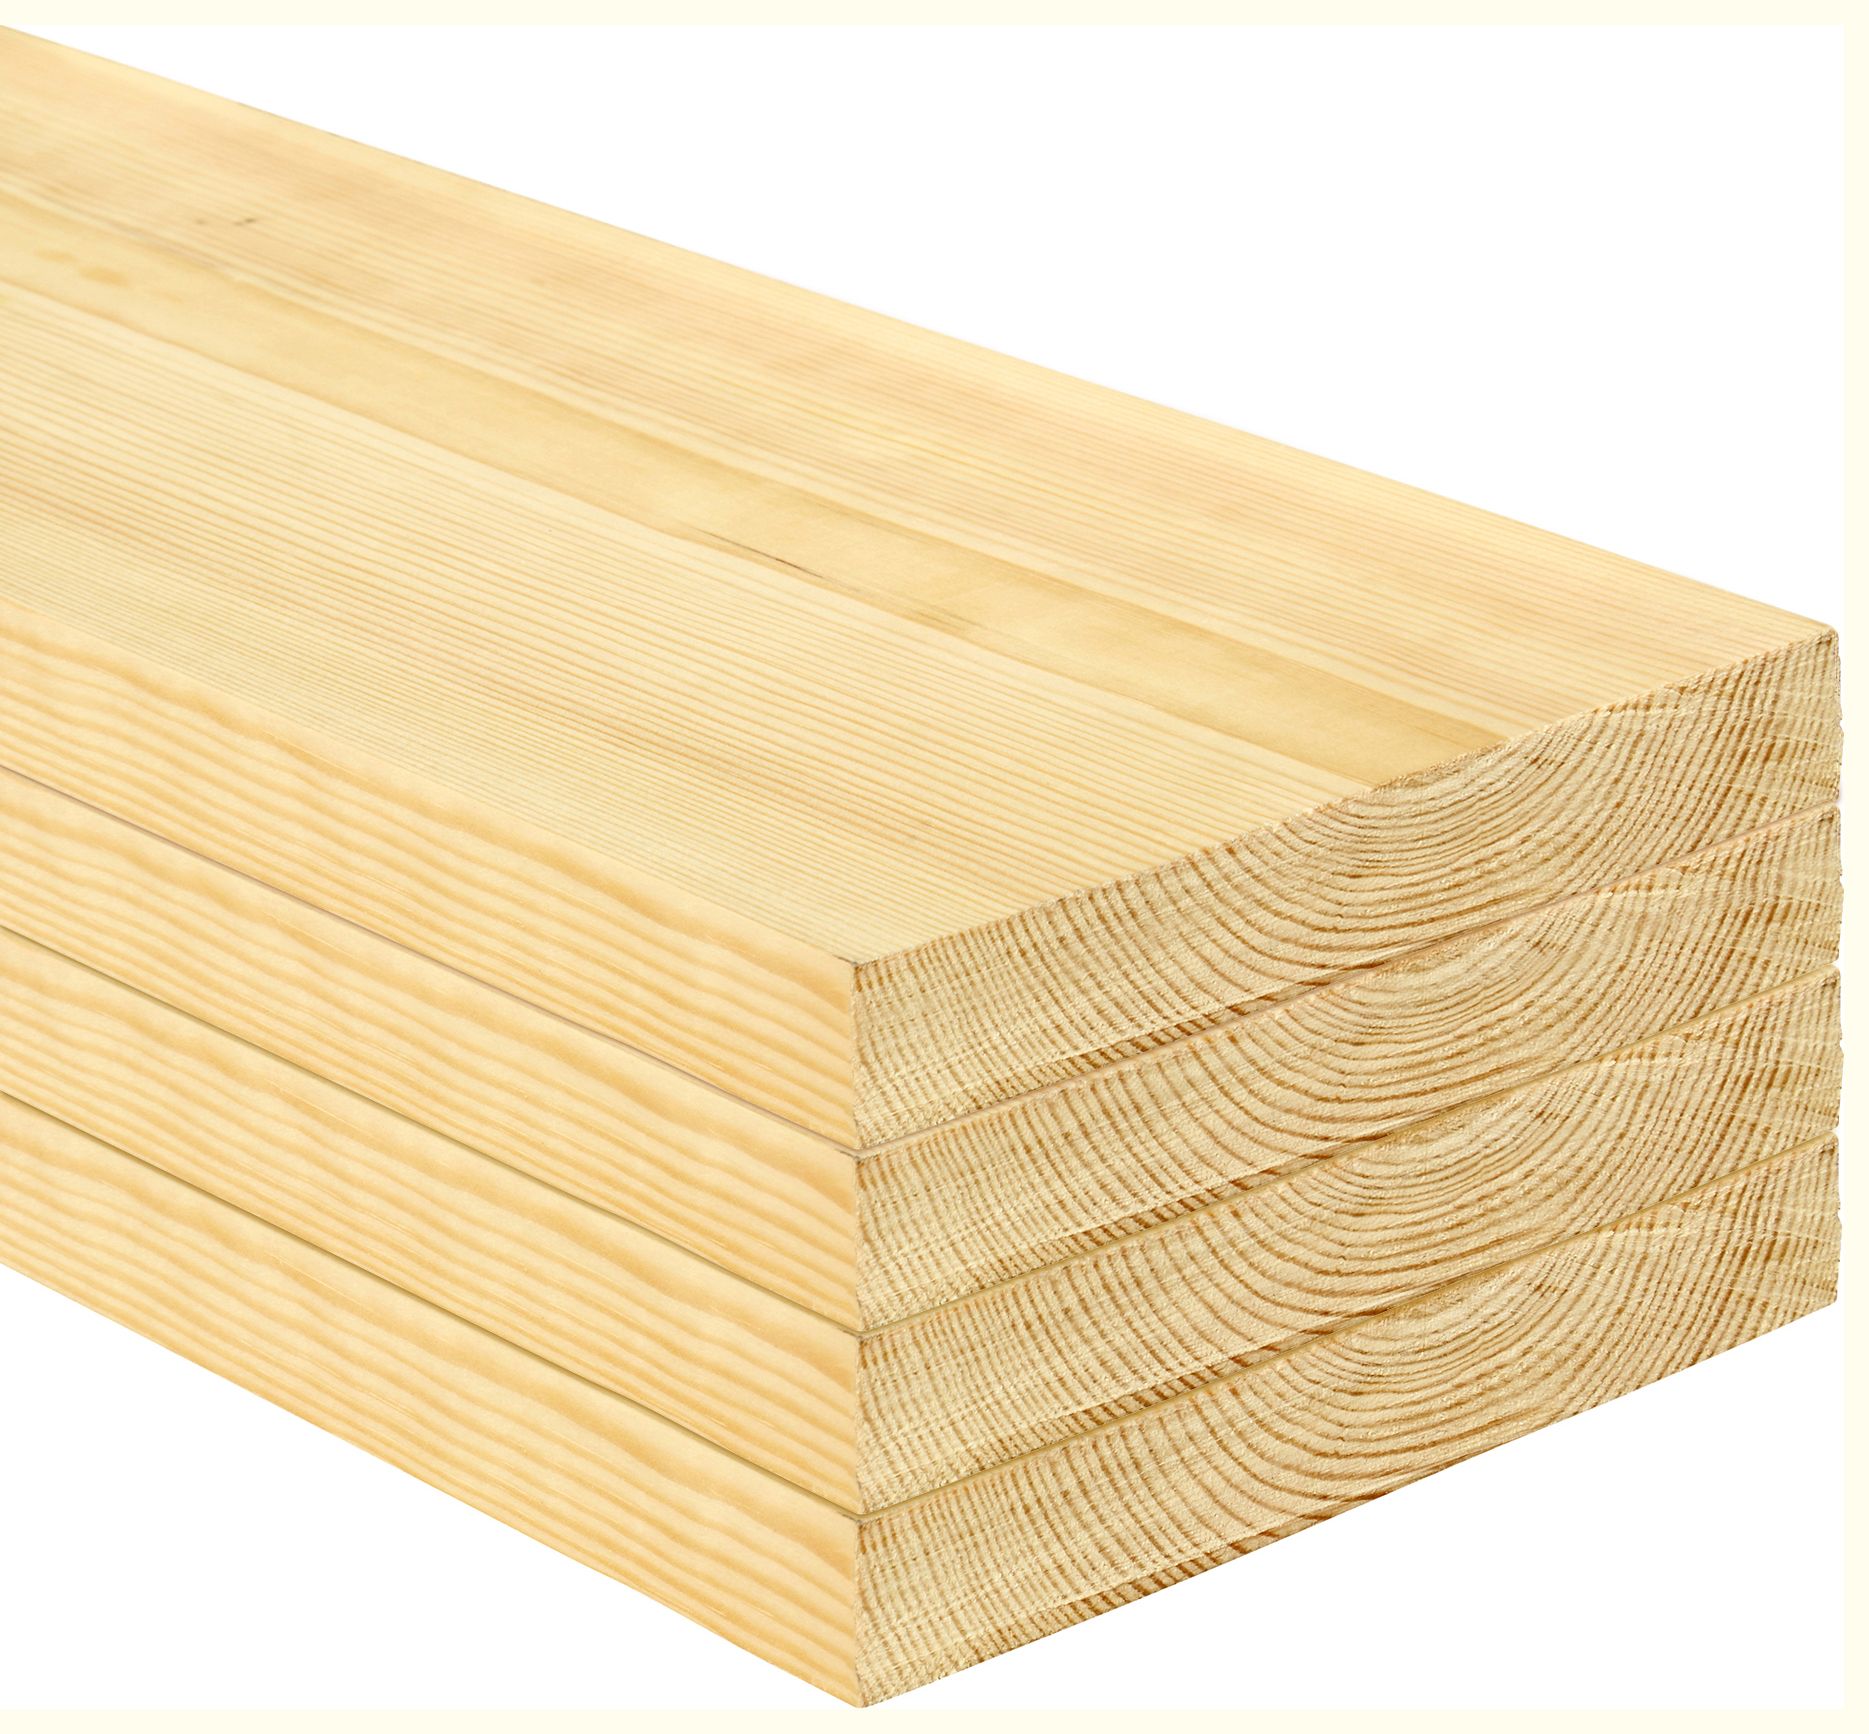 Image of Wickes Redwood PSE Timber - 20.5 x 144 x 2400mm - Pack of 4